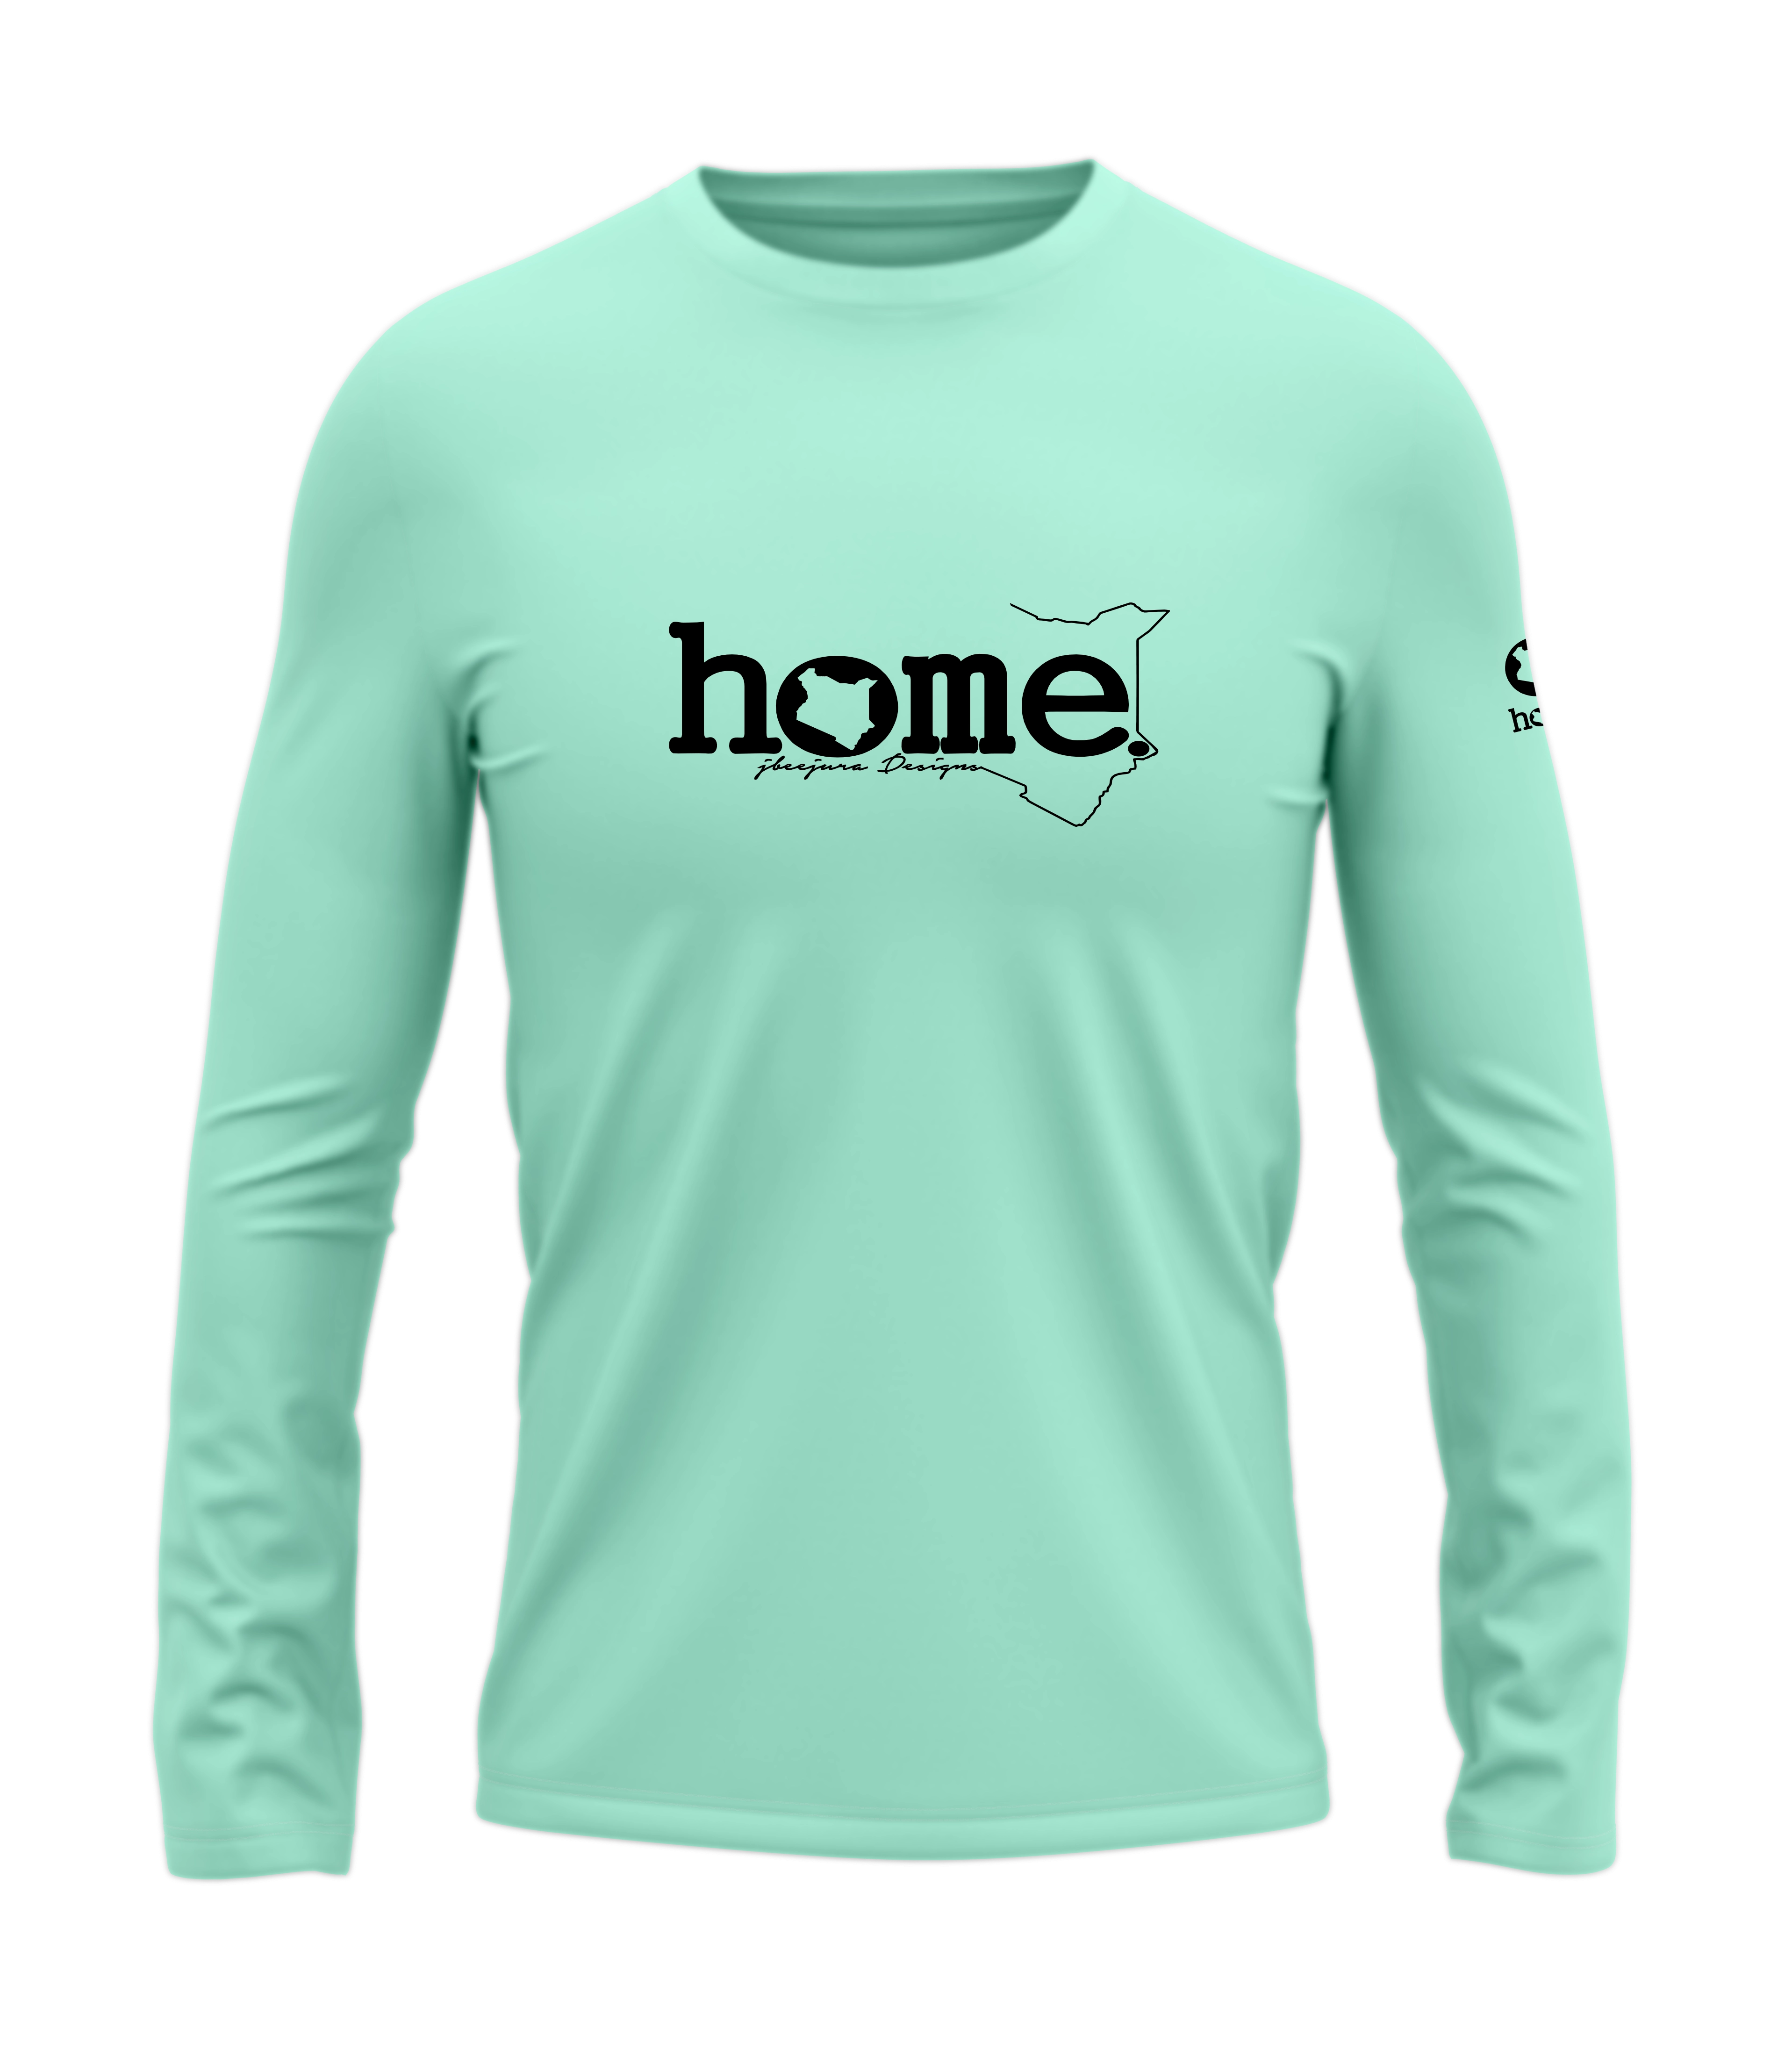 home_254 LONG-SLEEVED TURQUOISE GREEN T-SHIRT WITH A BLACK CLASSIC WORDS PRINT – COTTON PLUS FABRIC